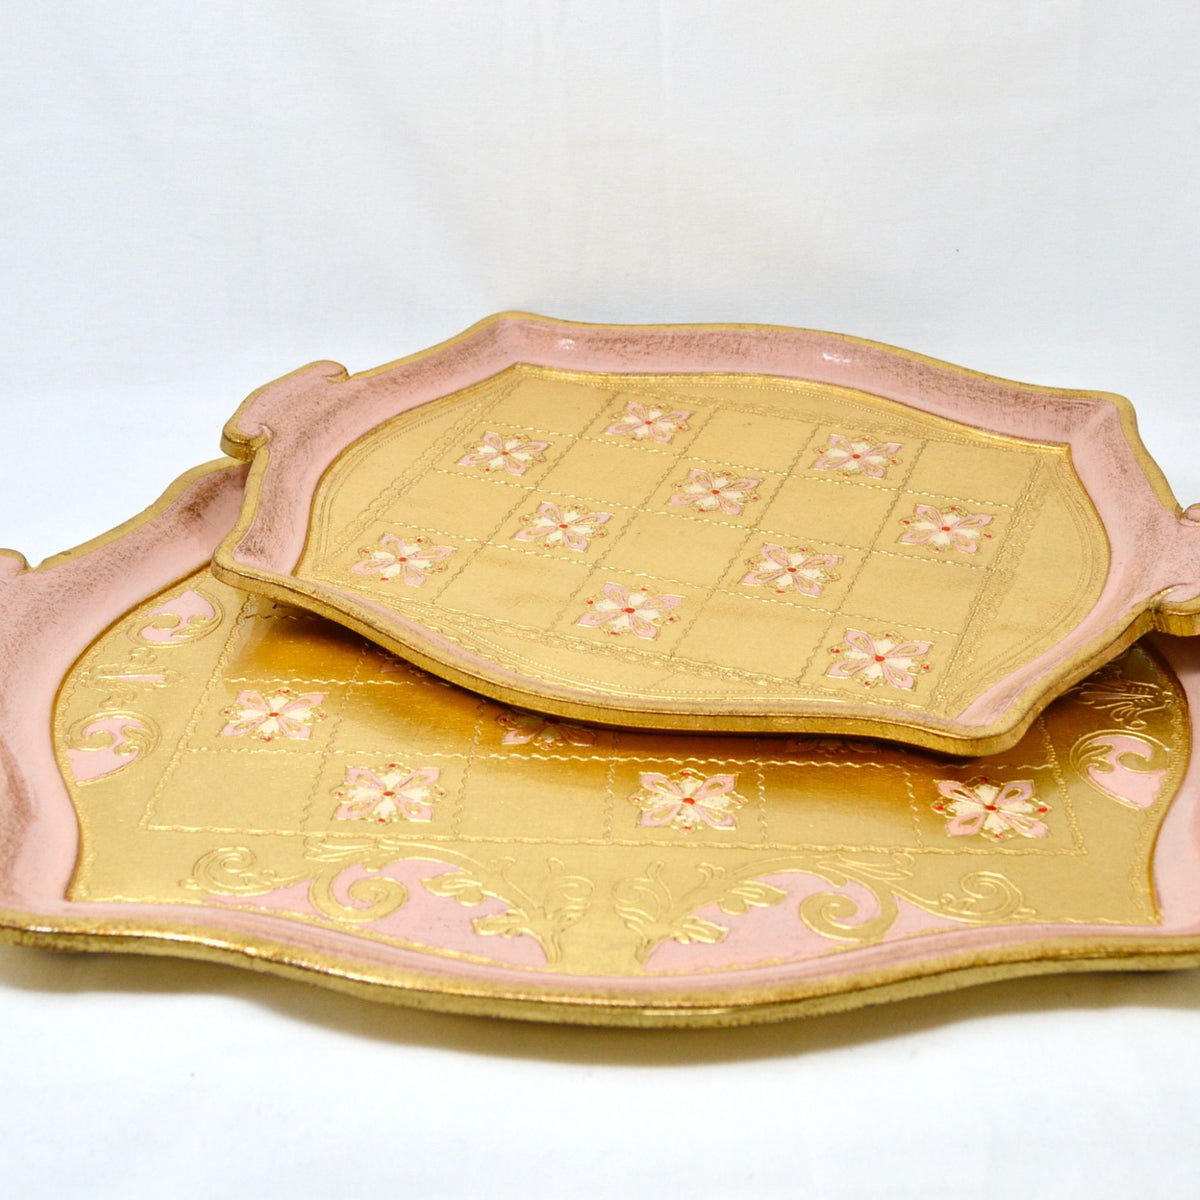 Florentine Carved Wood Pink Tray, Large or Small, Made in Italy - My Italian Decor